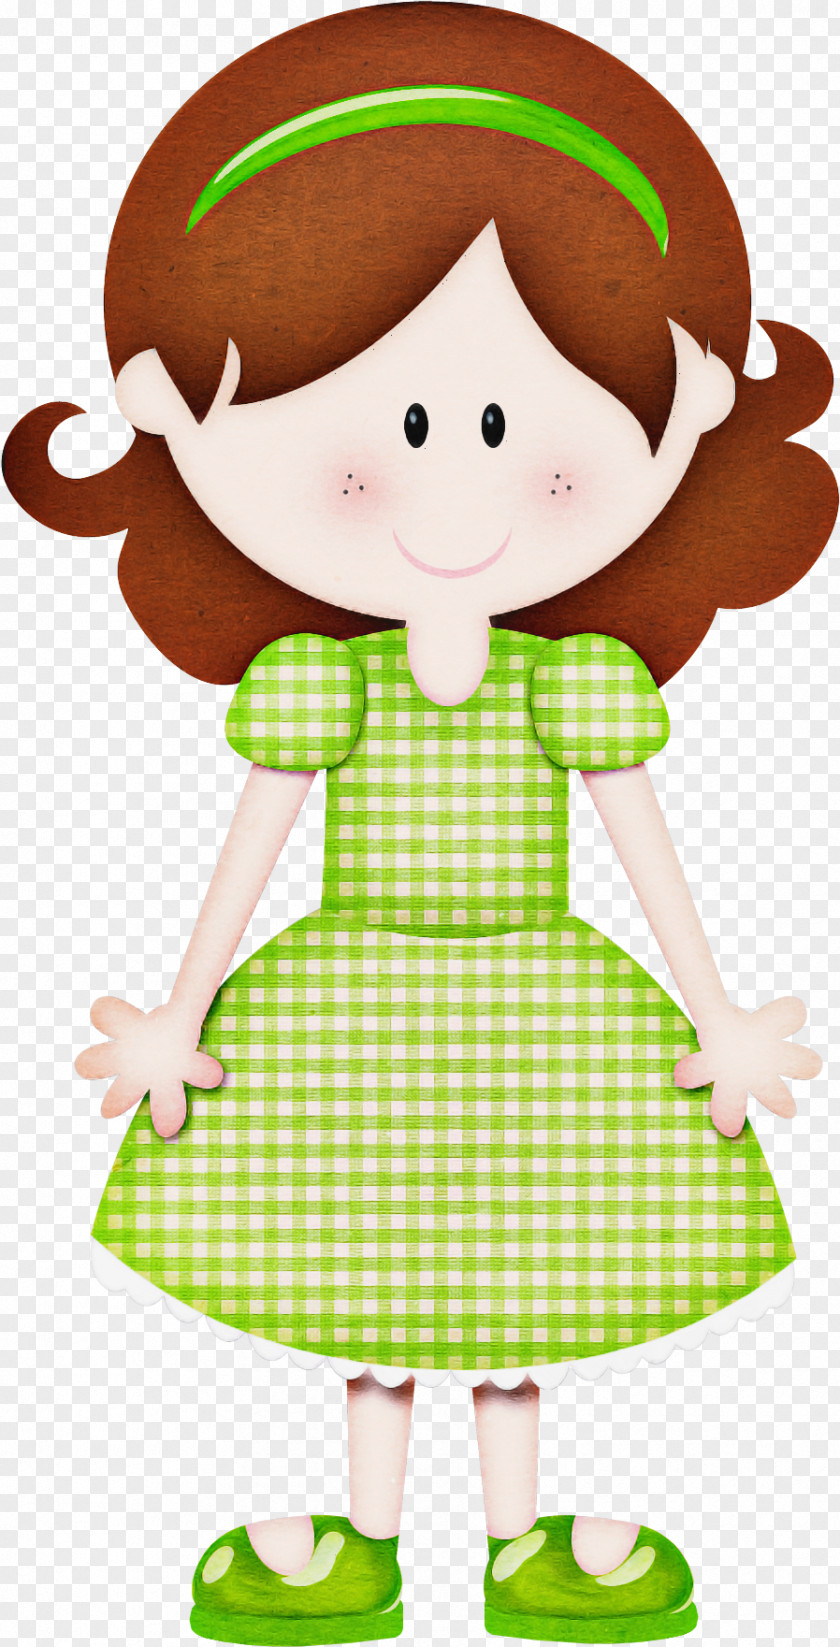 Toy Doll Cartoon Green PNG